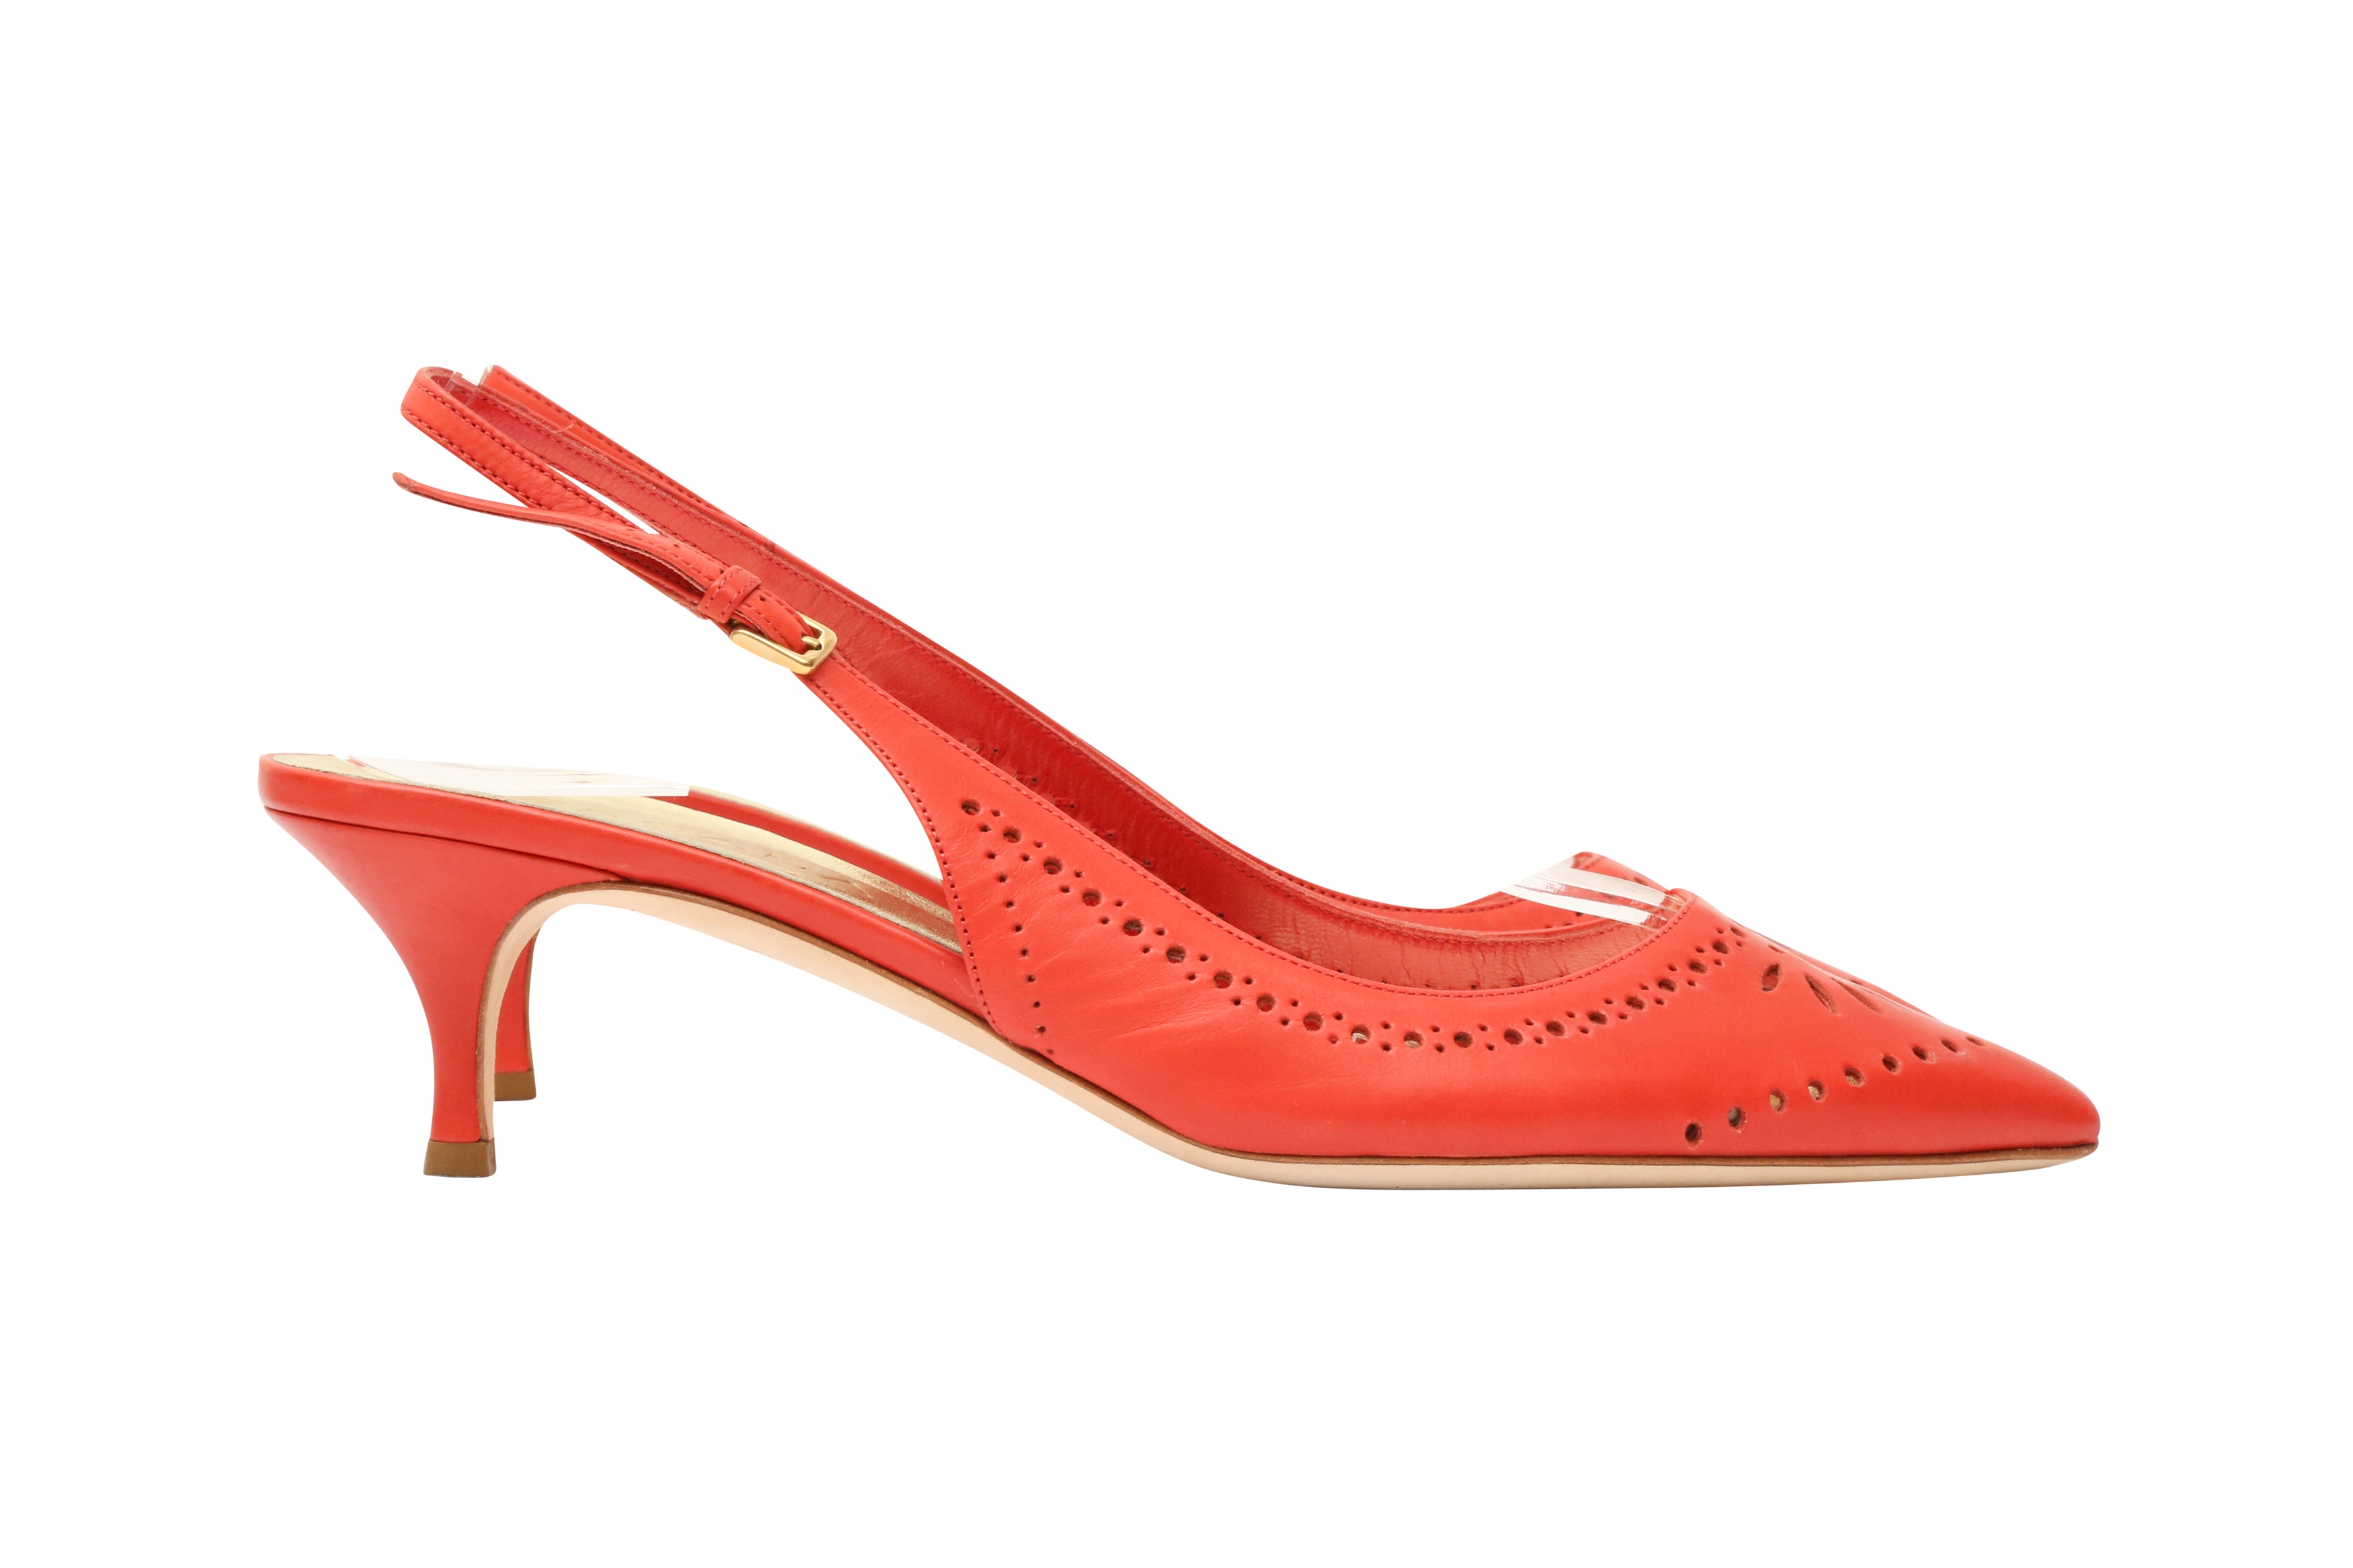 Escada Coral Perforated Kitten Heeled Sling Back - Size 39